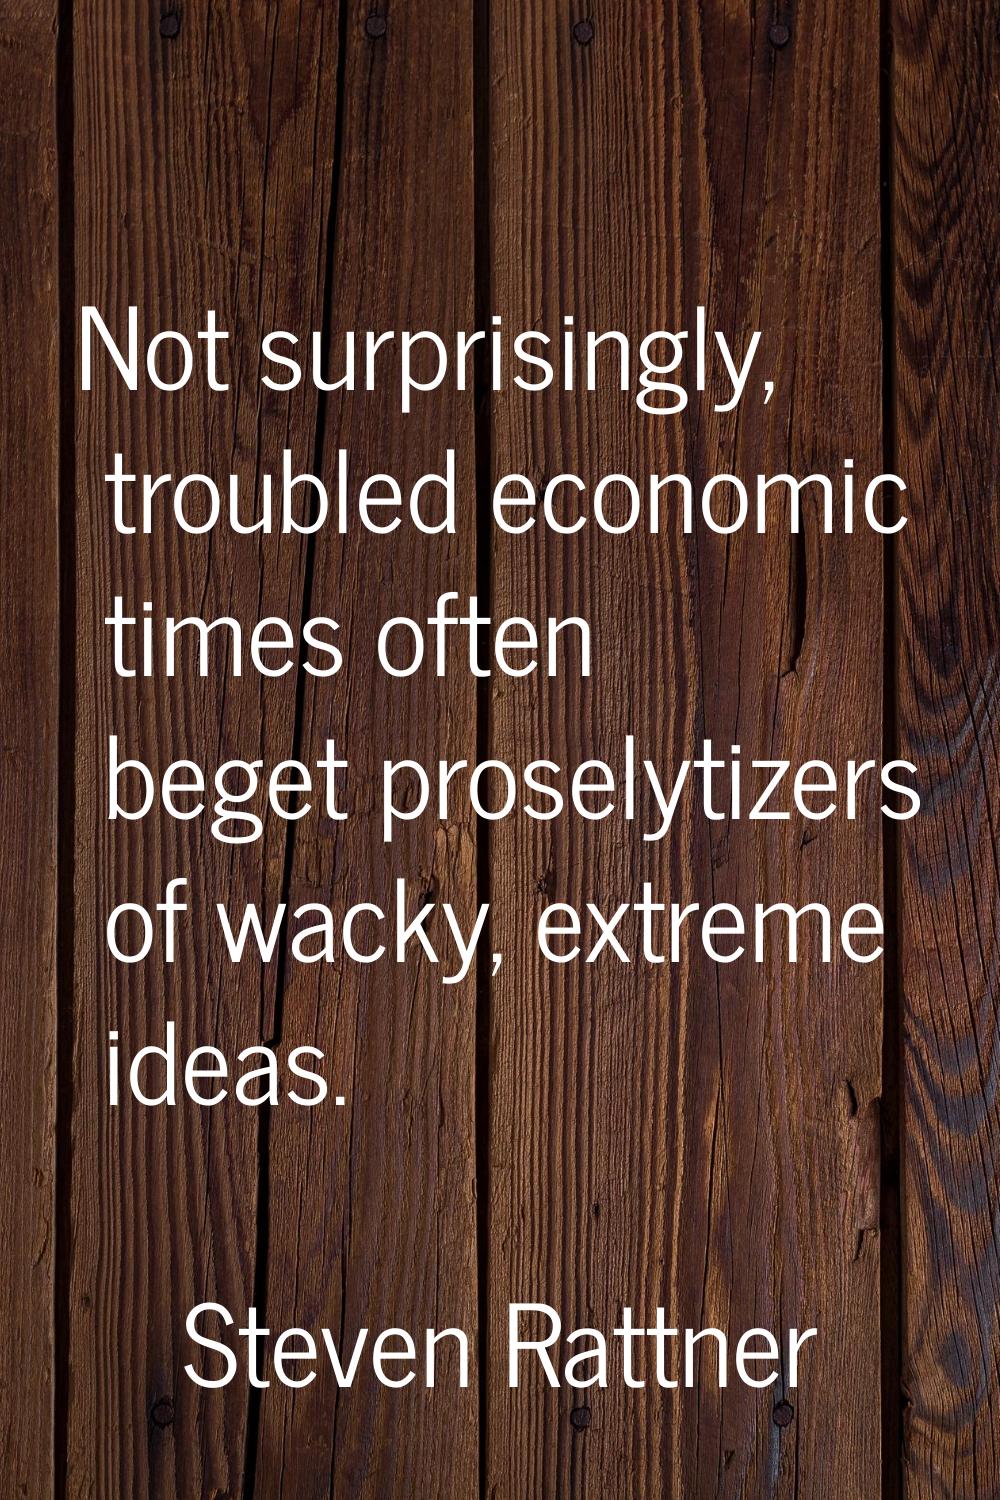 Not surprisingly, troubled economic times often beget proselytizers of wacky, extreme ideas.